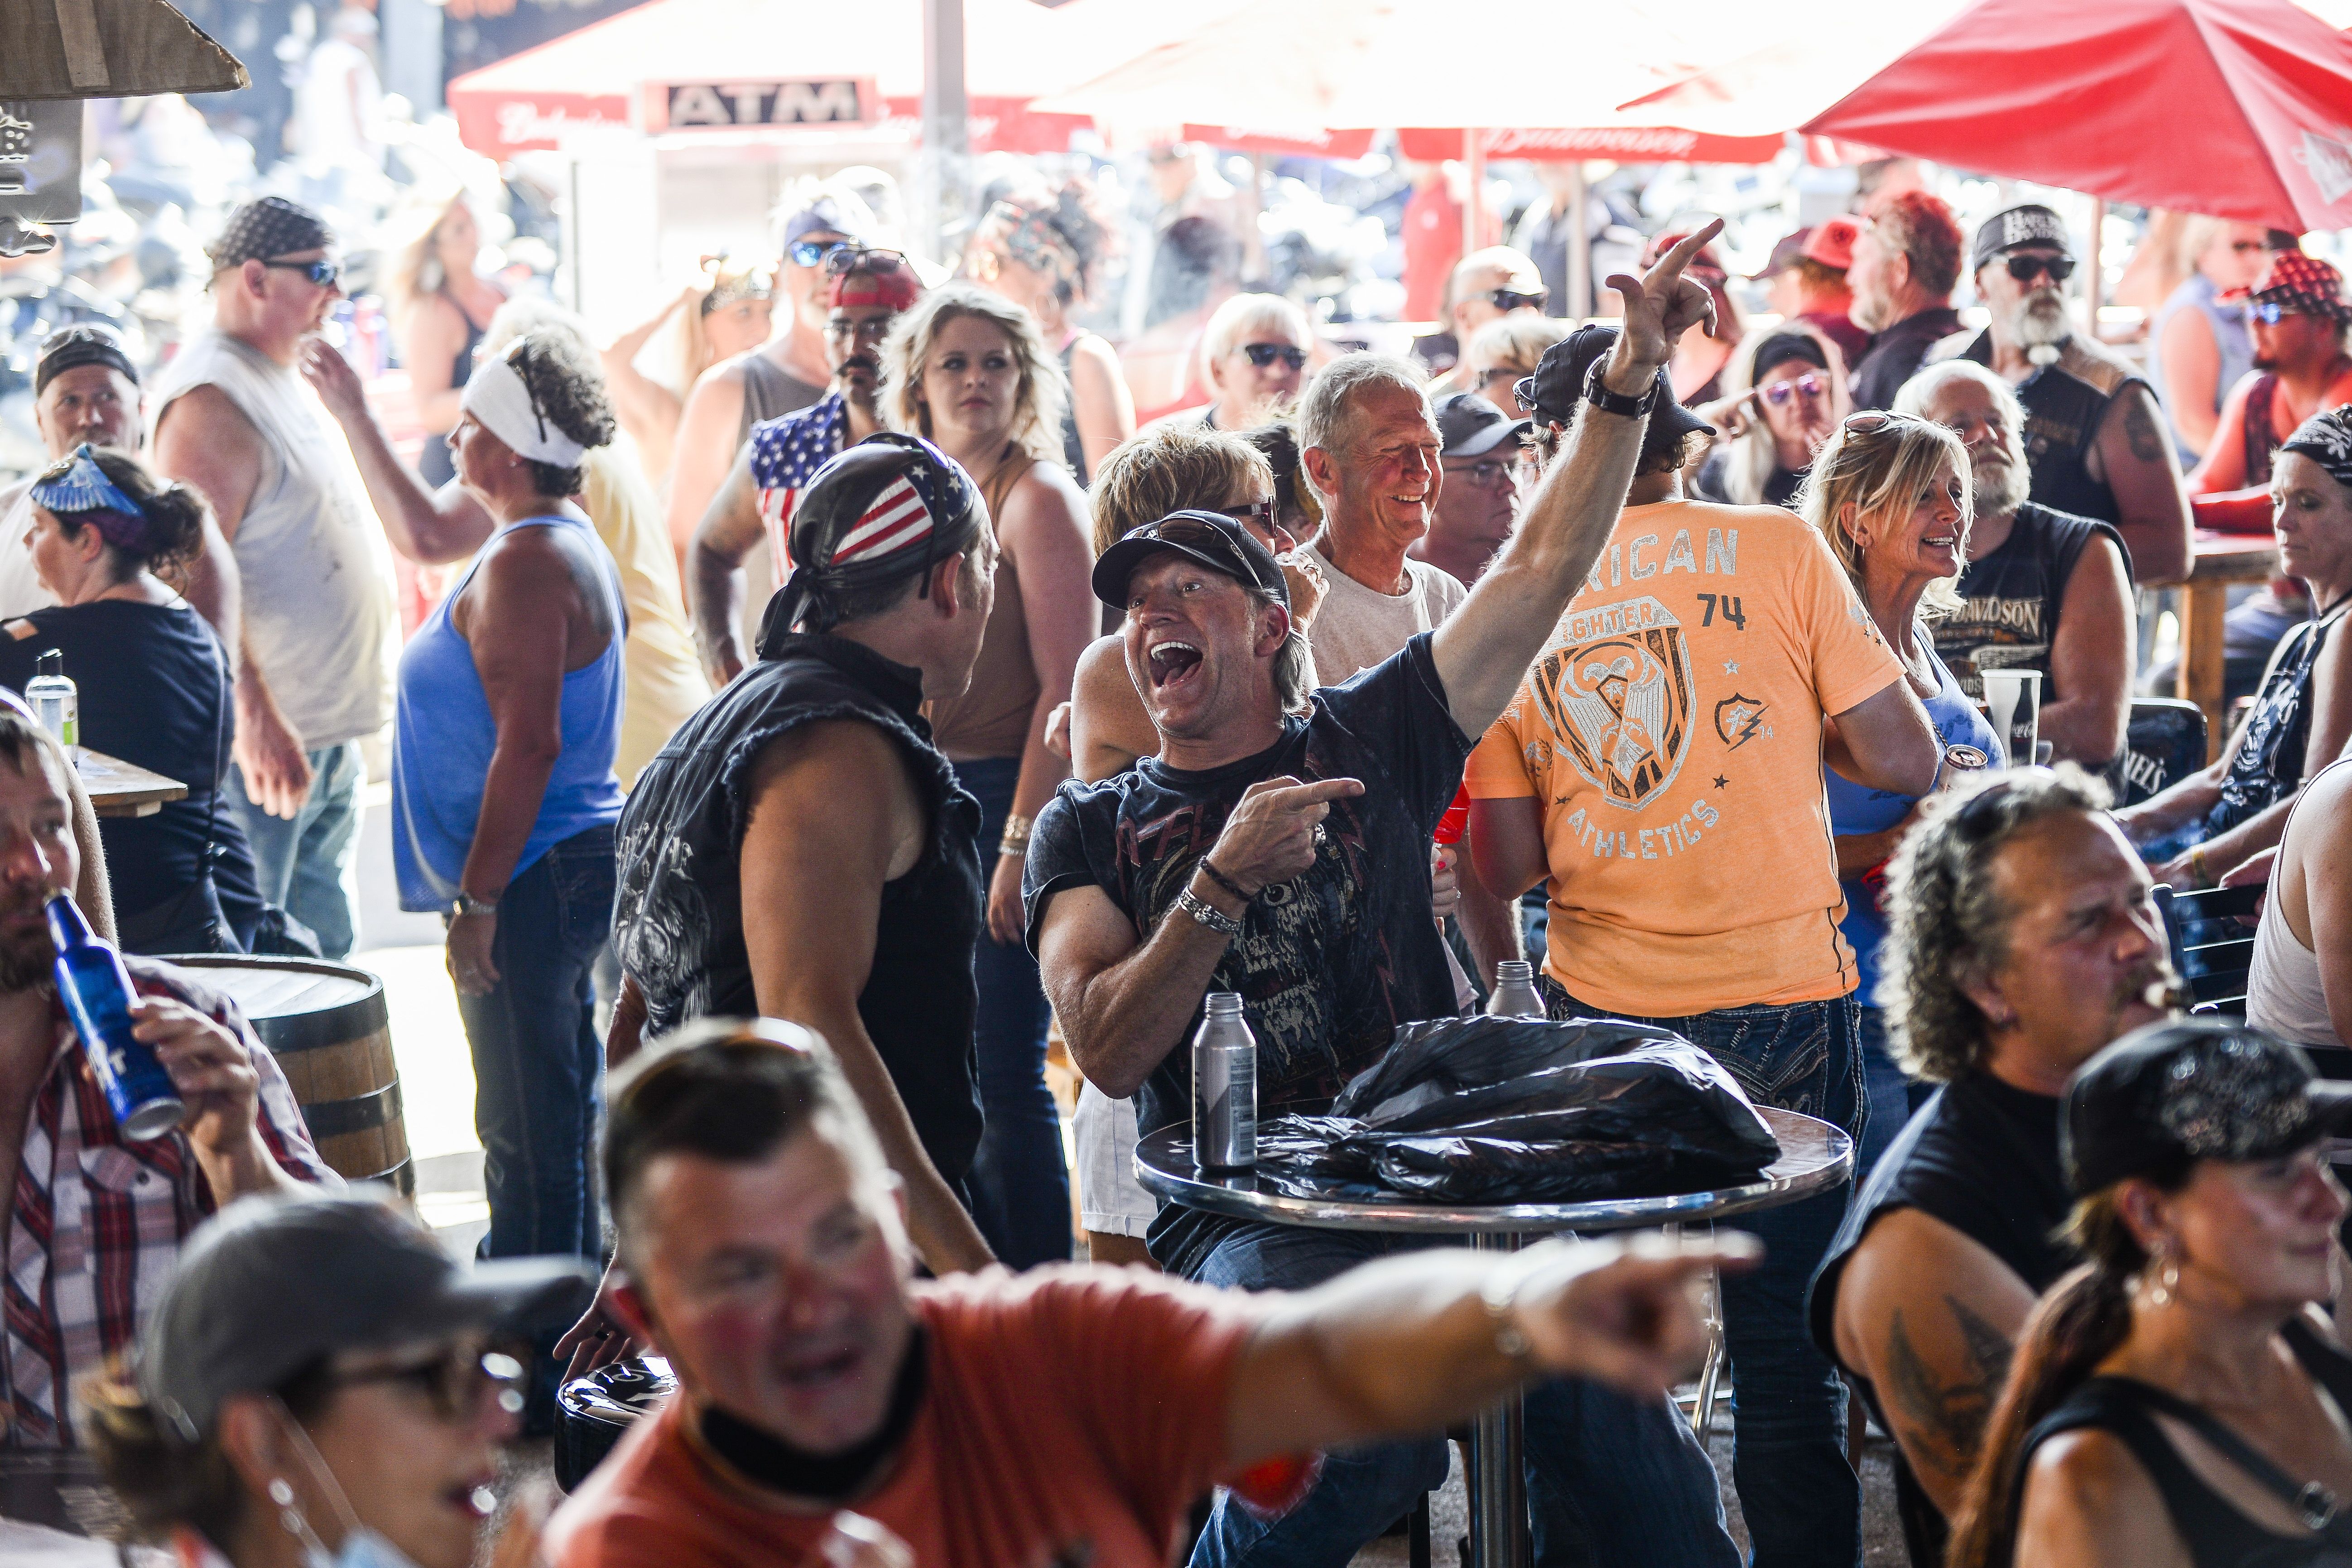 People cheering while watching a band perform in Sturgis on Aug. 7.